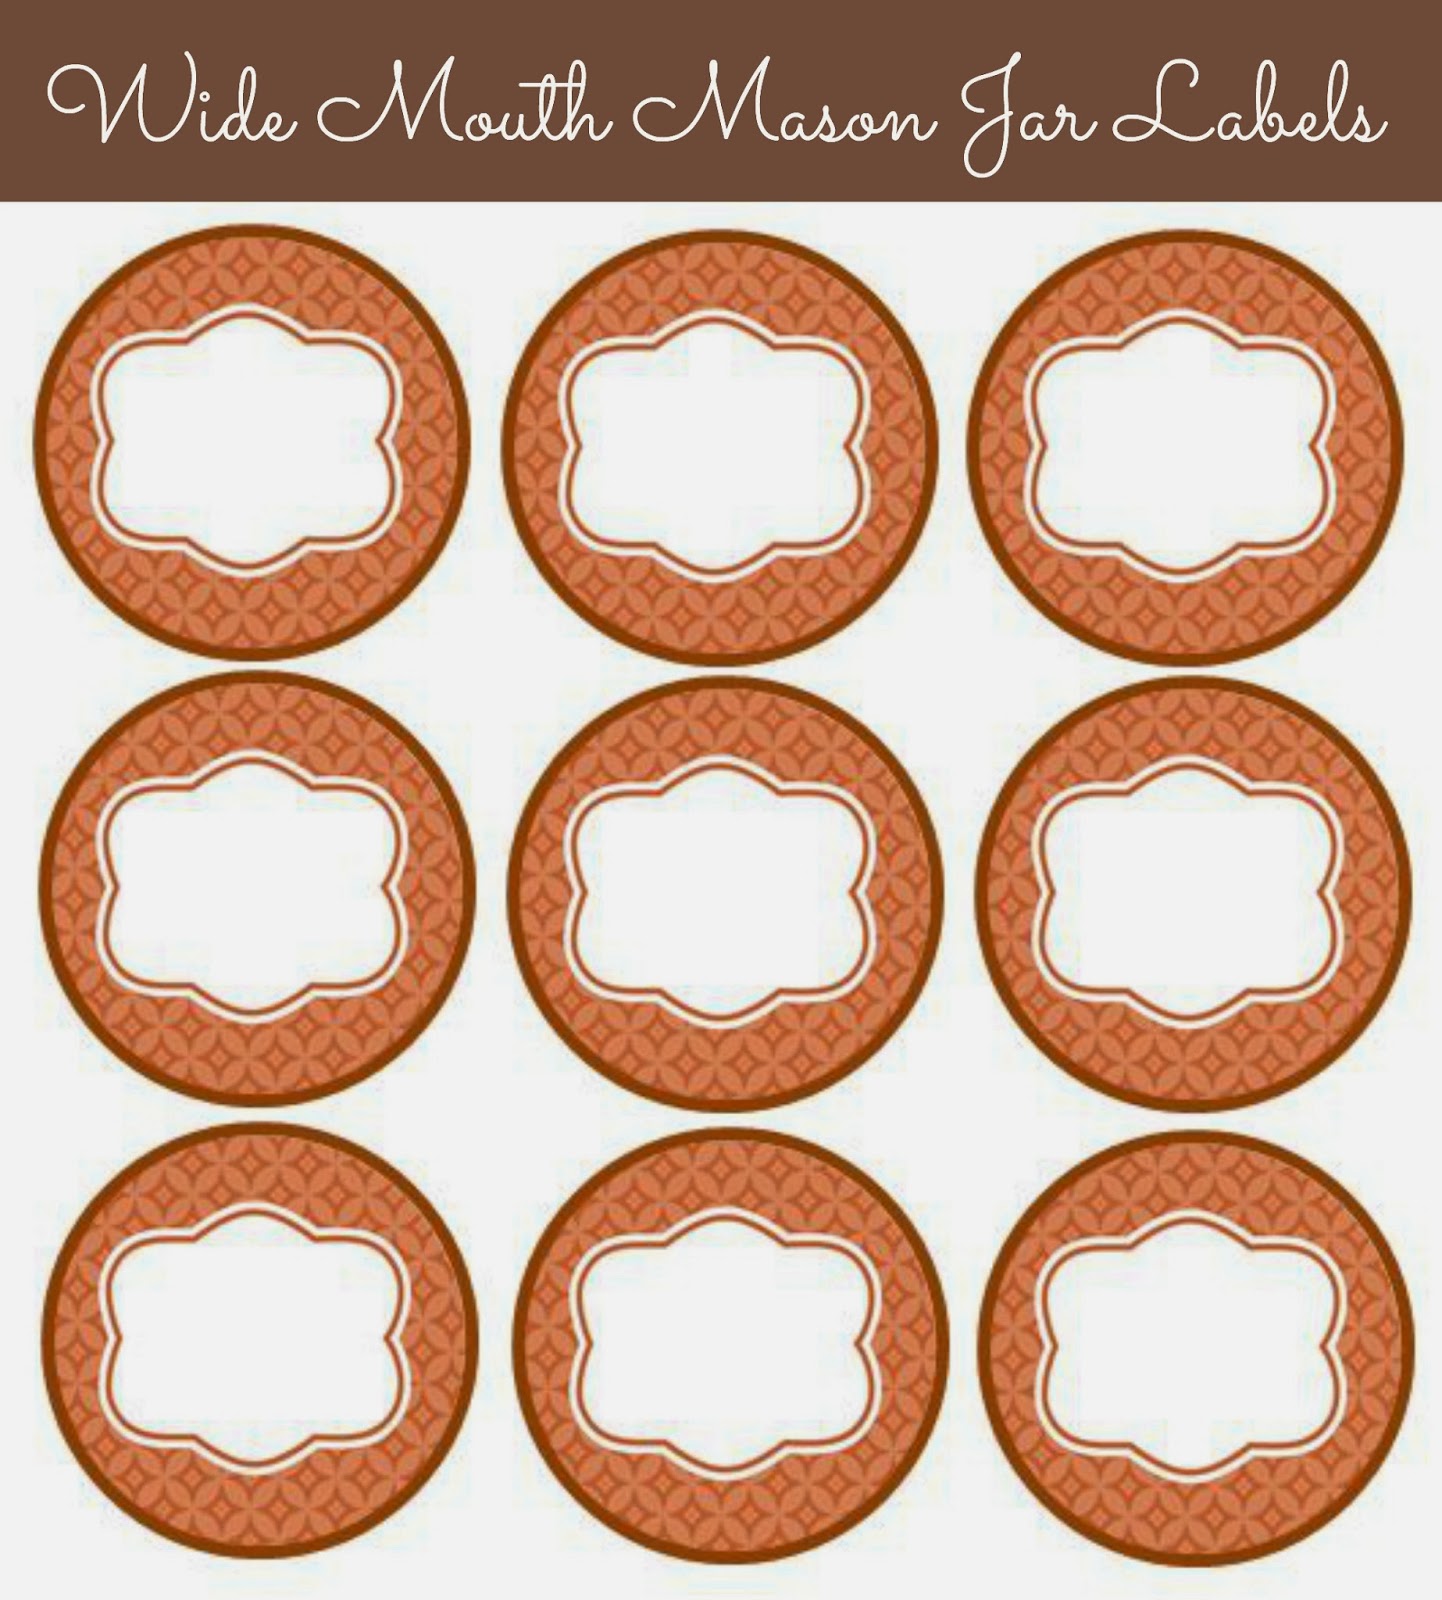 Free Printable: Wide-mouth Mason Jar Labels, Fall Colors With Canning Jar Labels Template